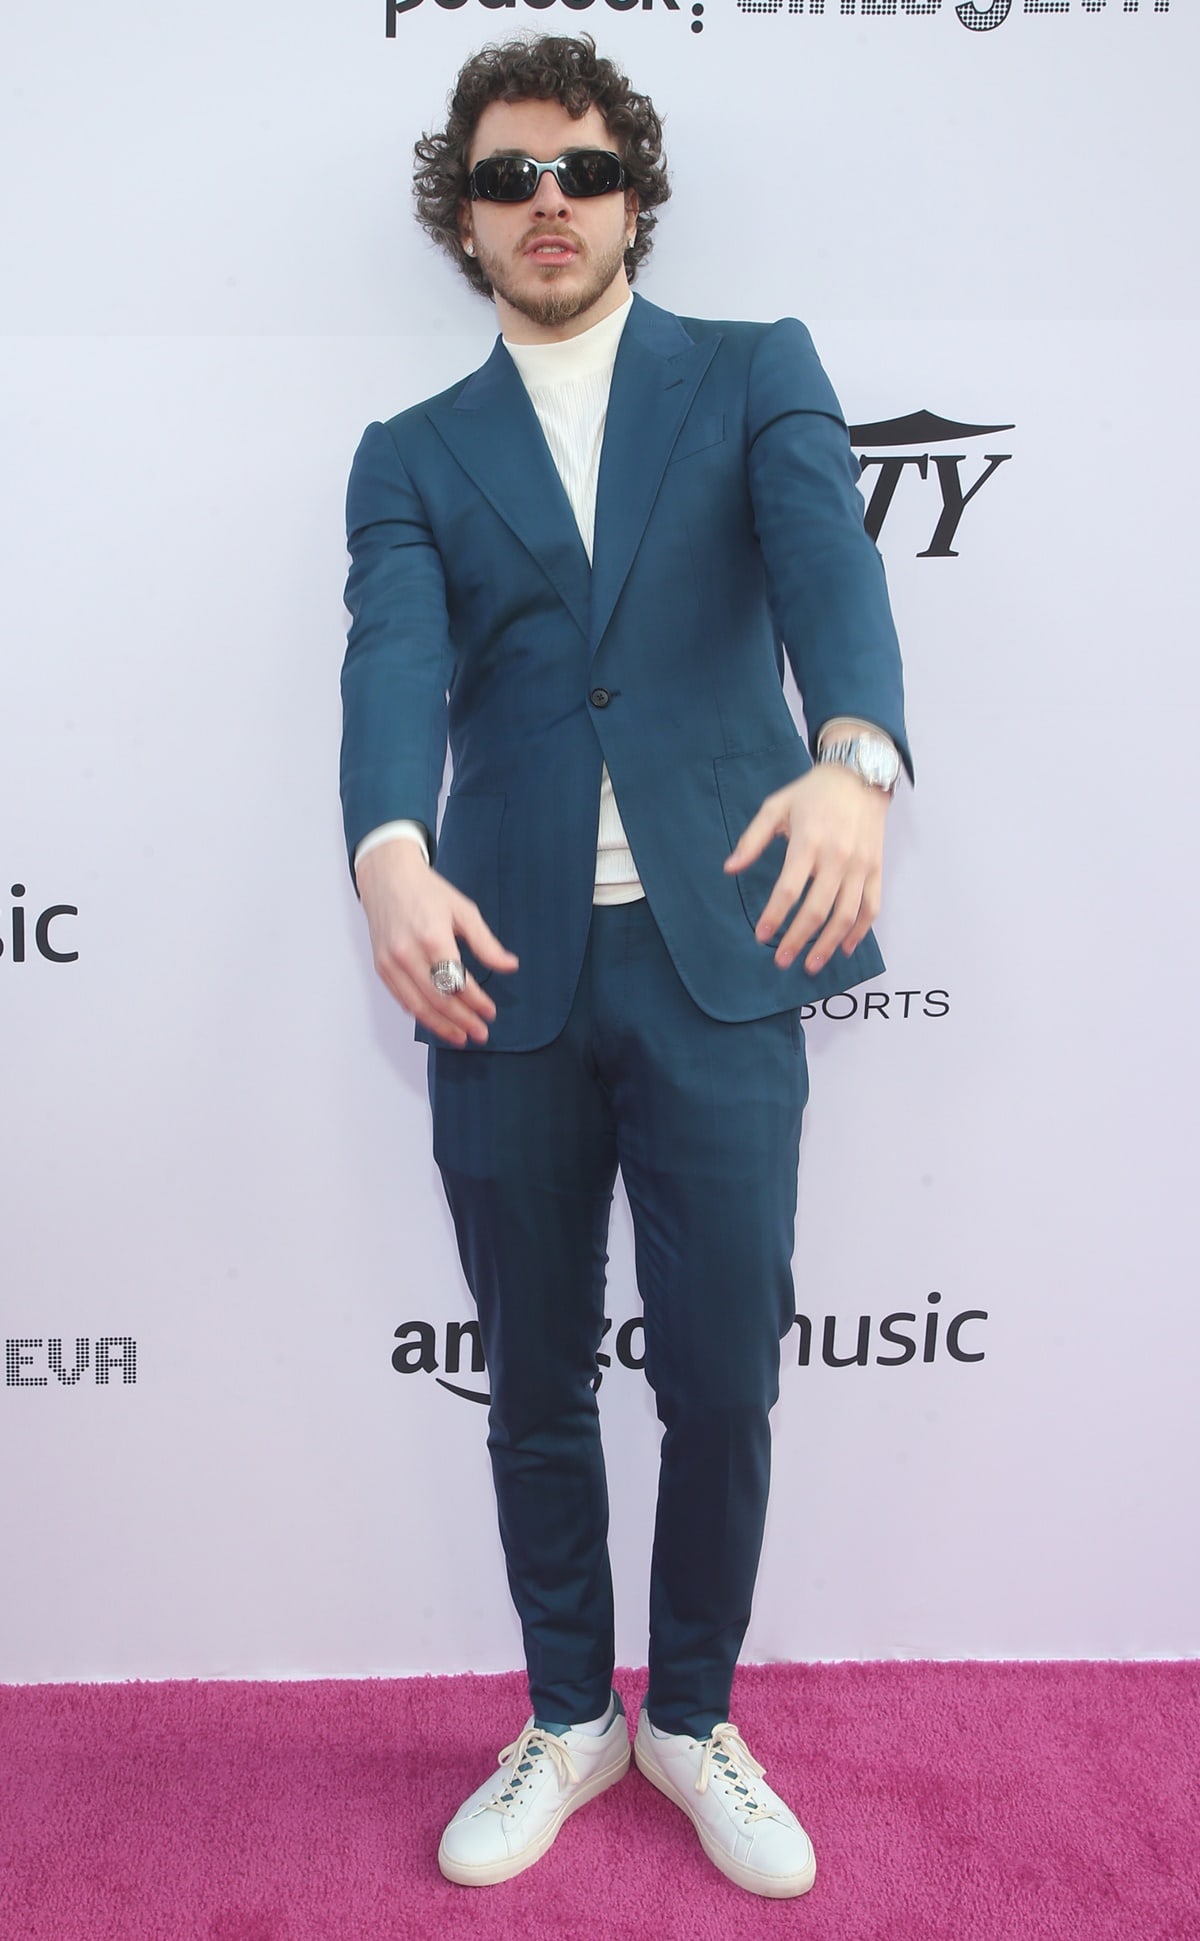 Jack Harlow attends Variety's Hitmakers Brunch presented by Peacock | Girls5eva